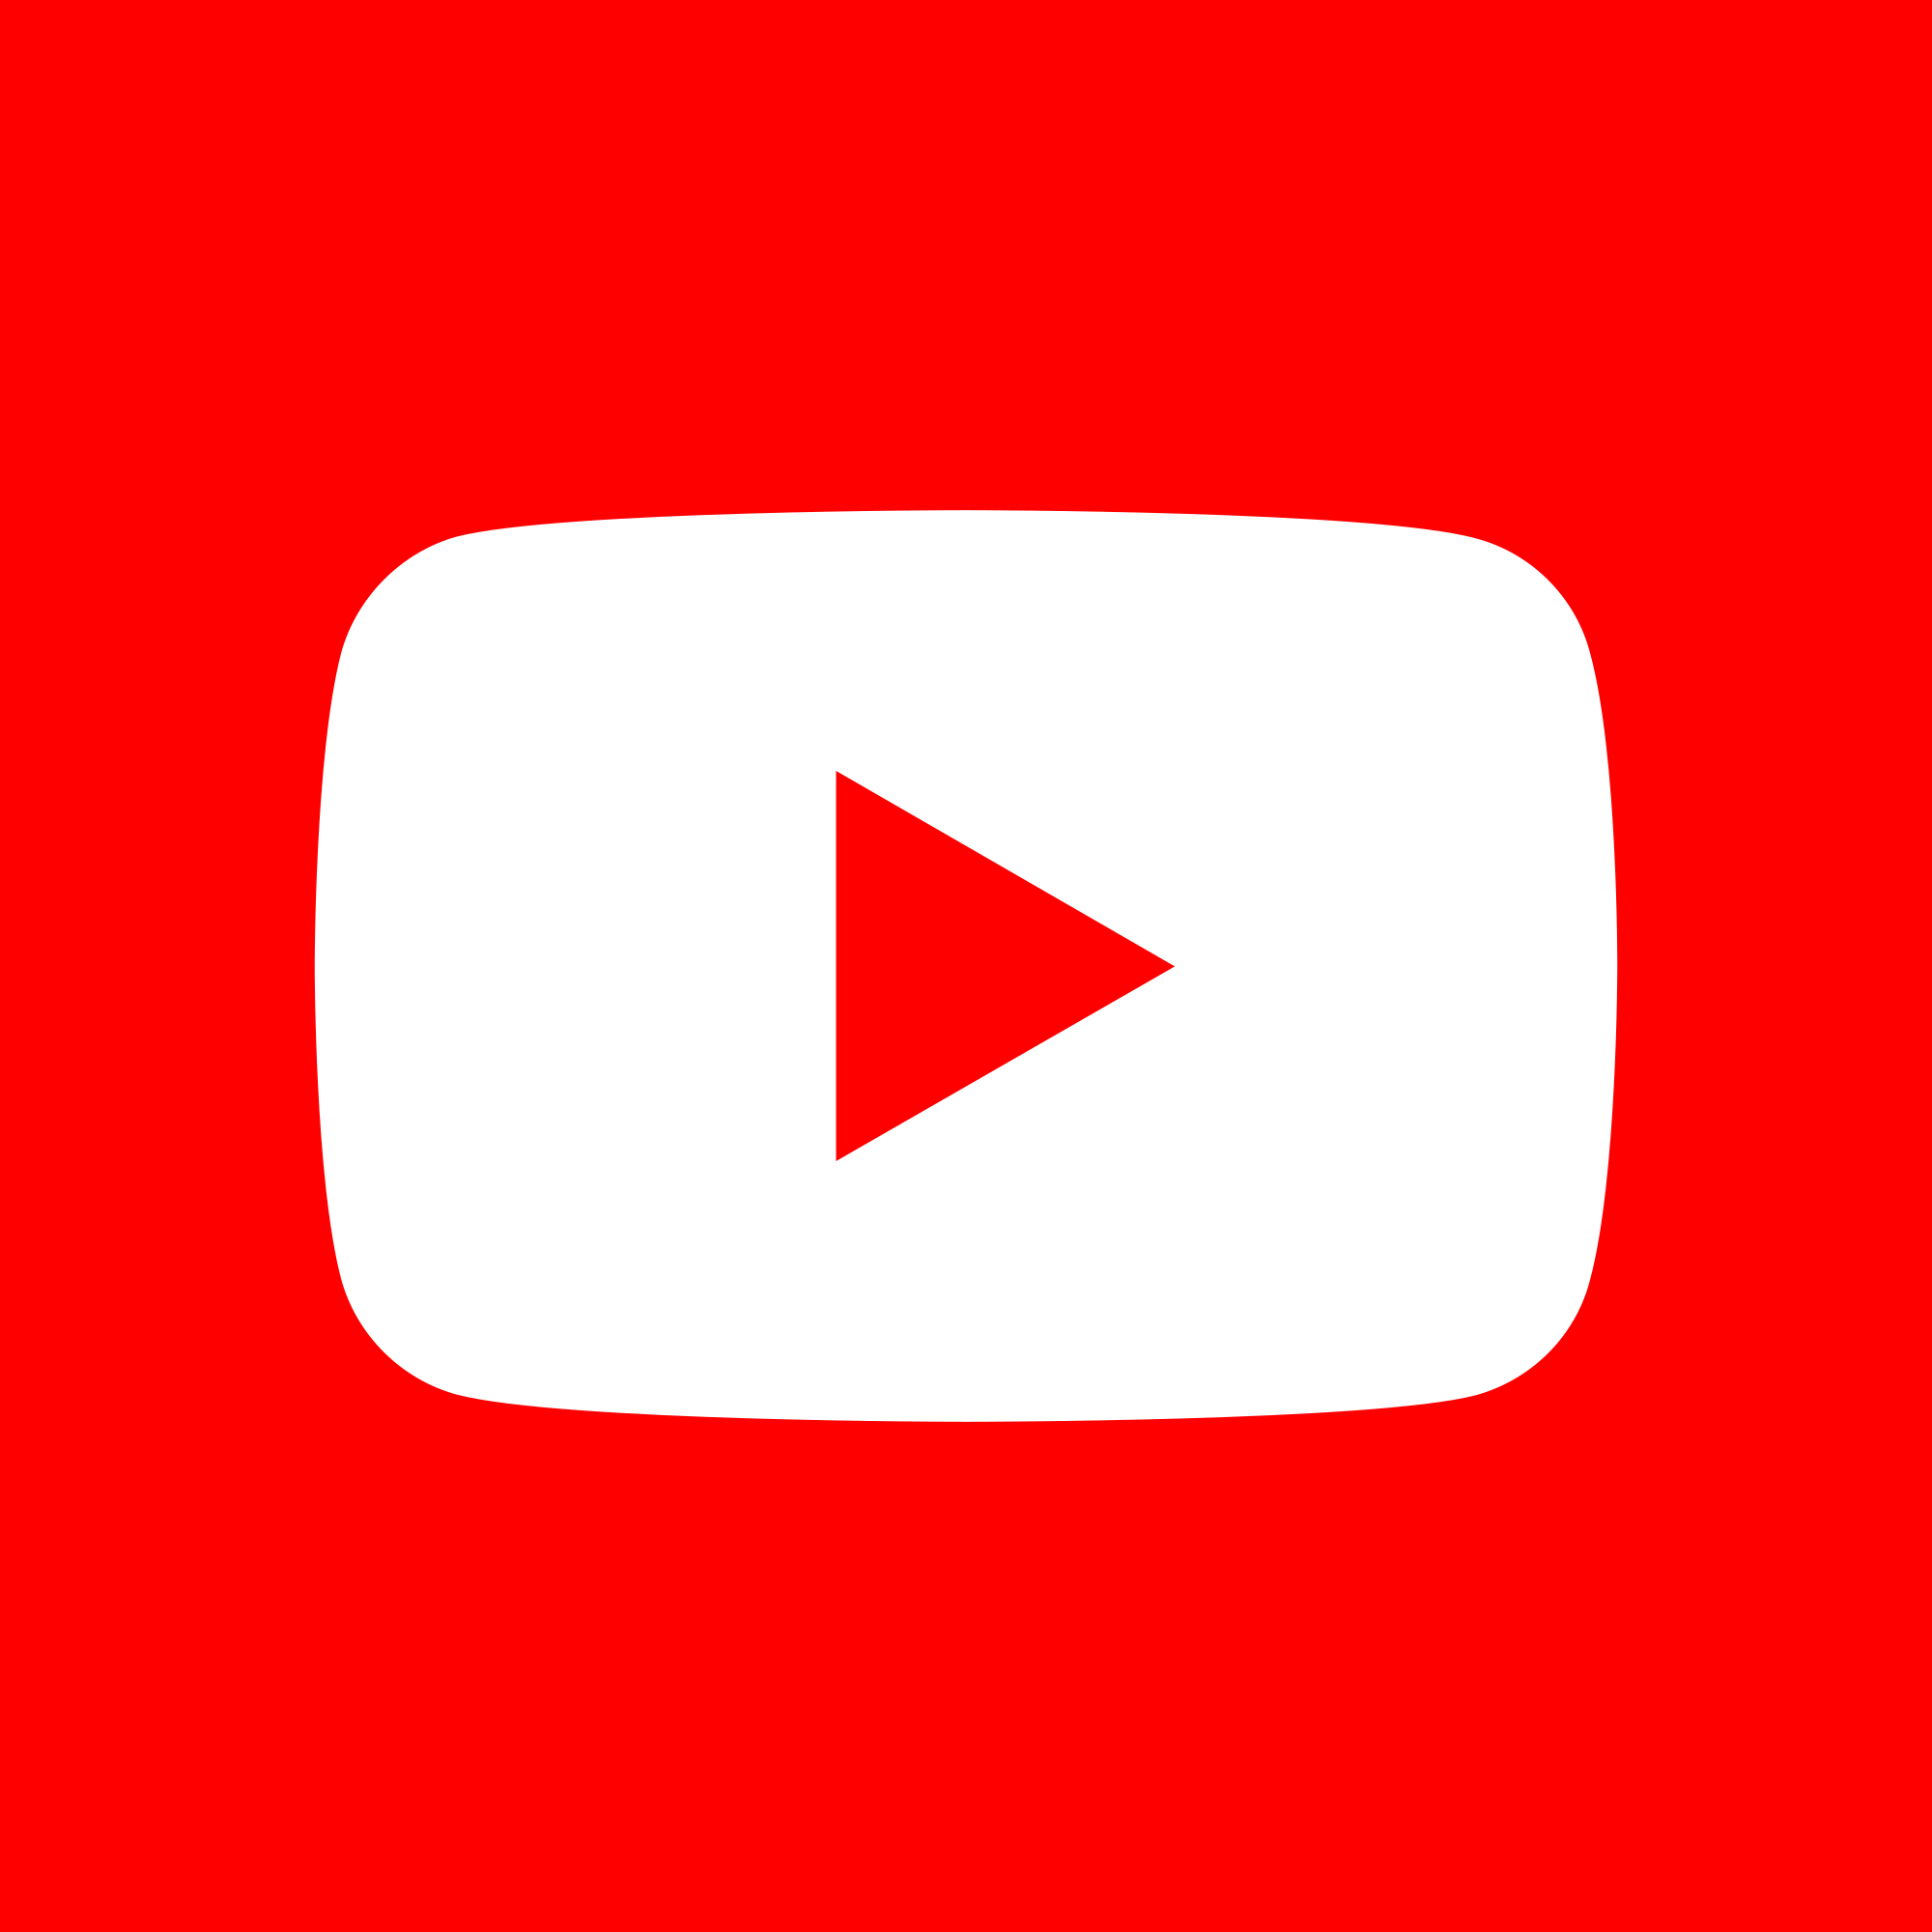 Using Red Square Logo - File:YouTube social red square (2017).svg - Wikimedia Commons